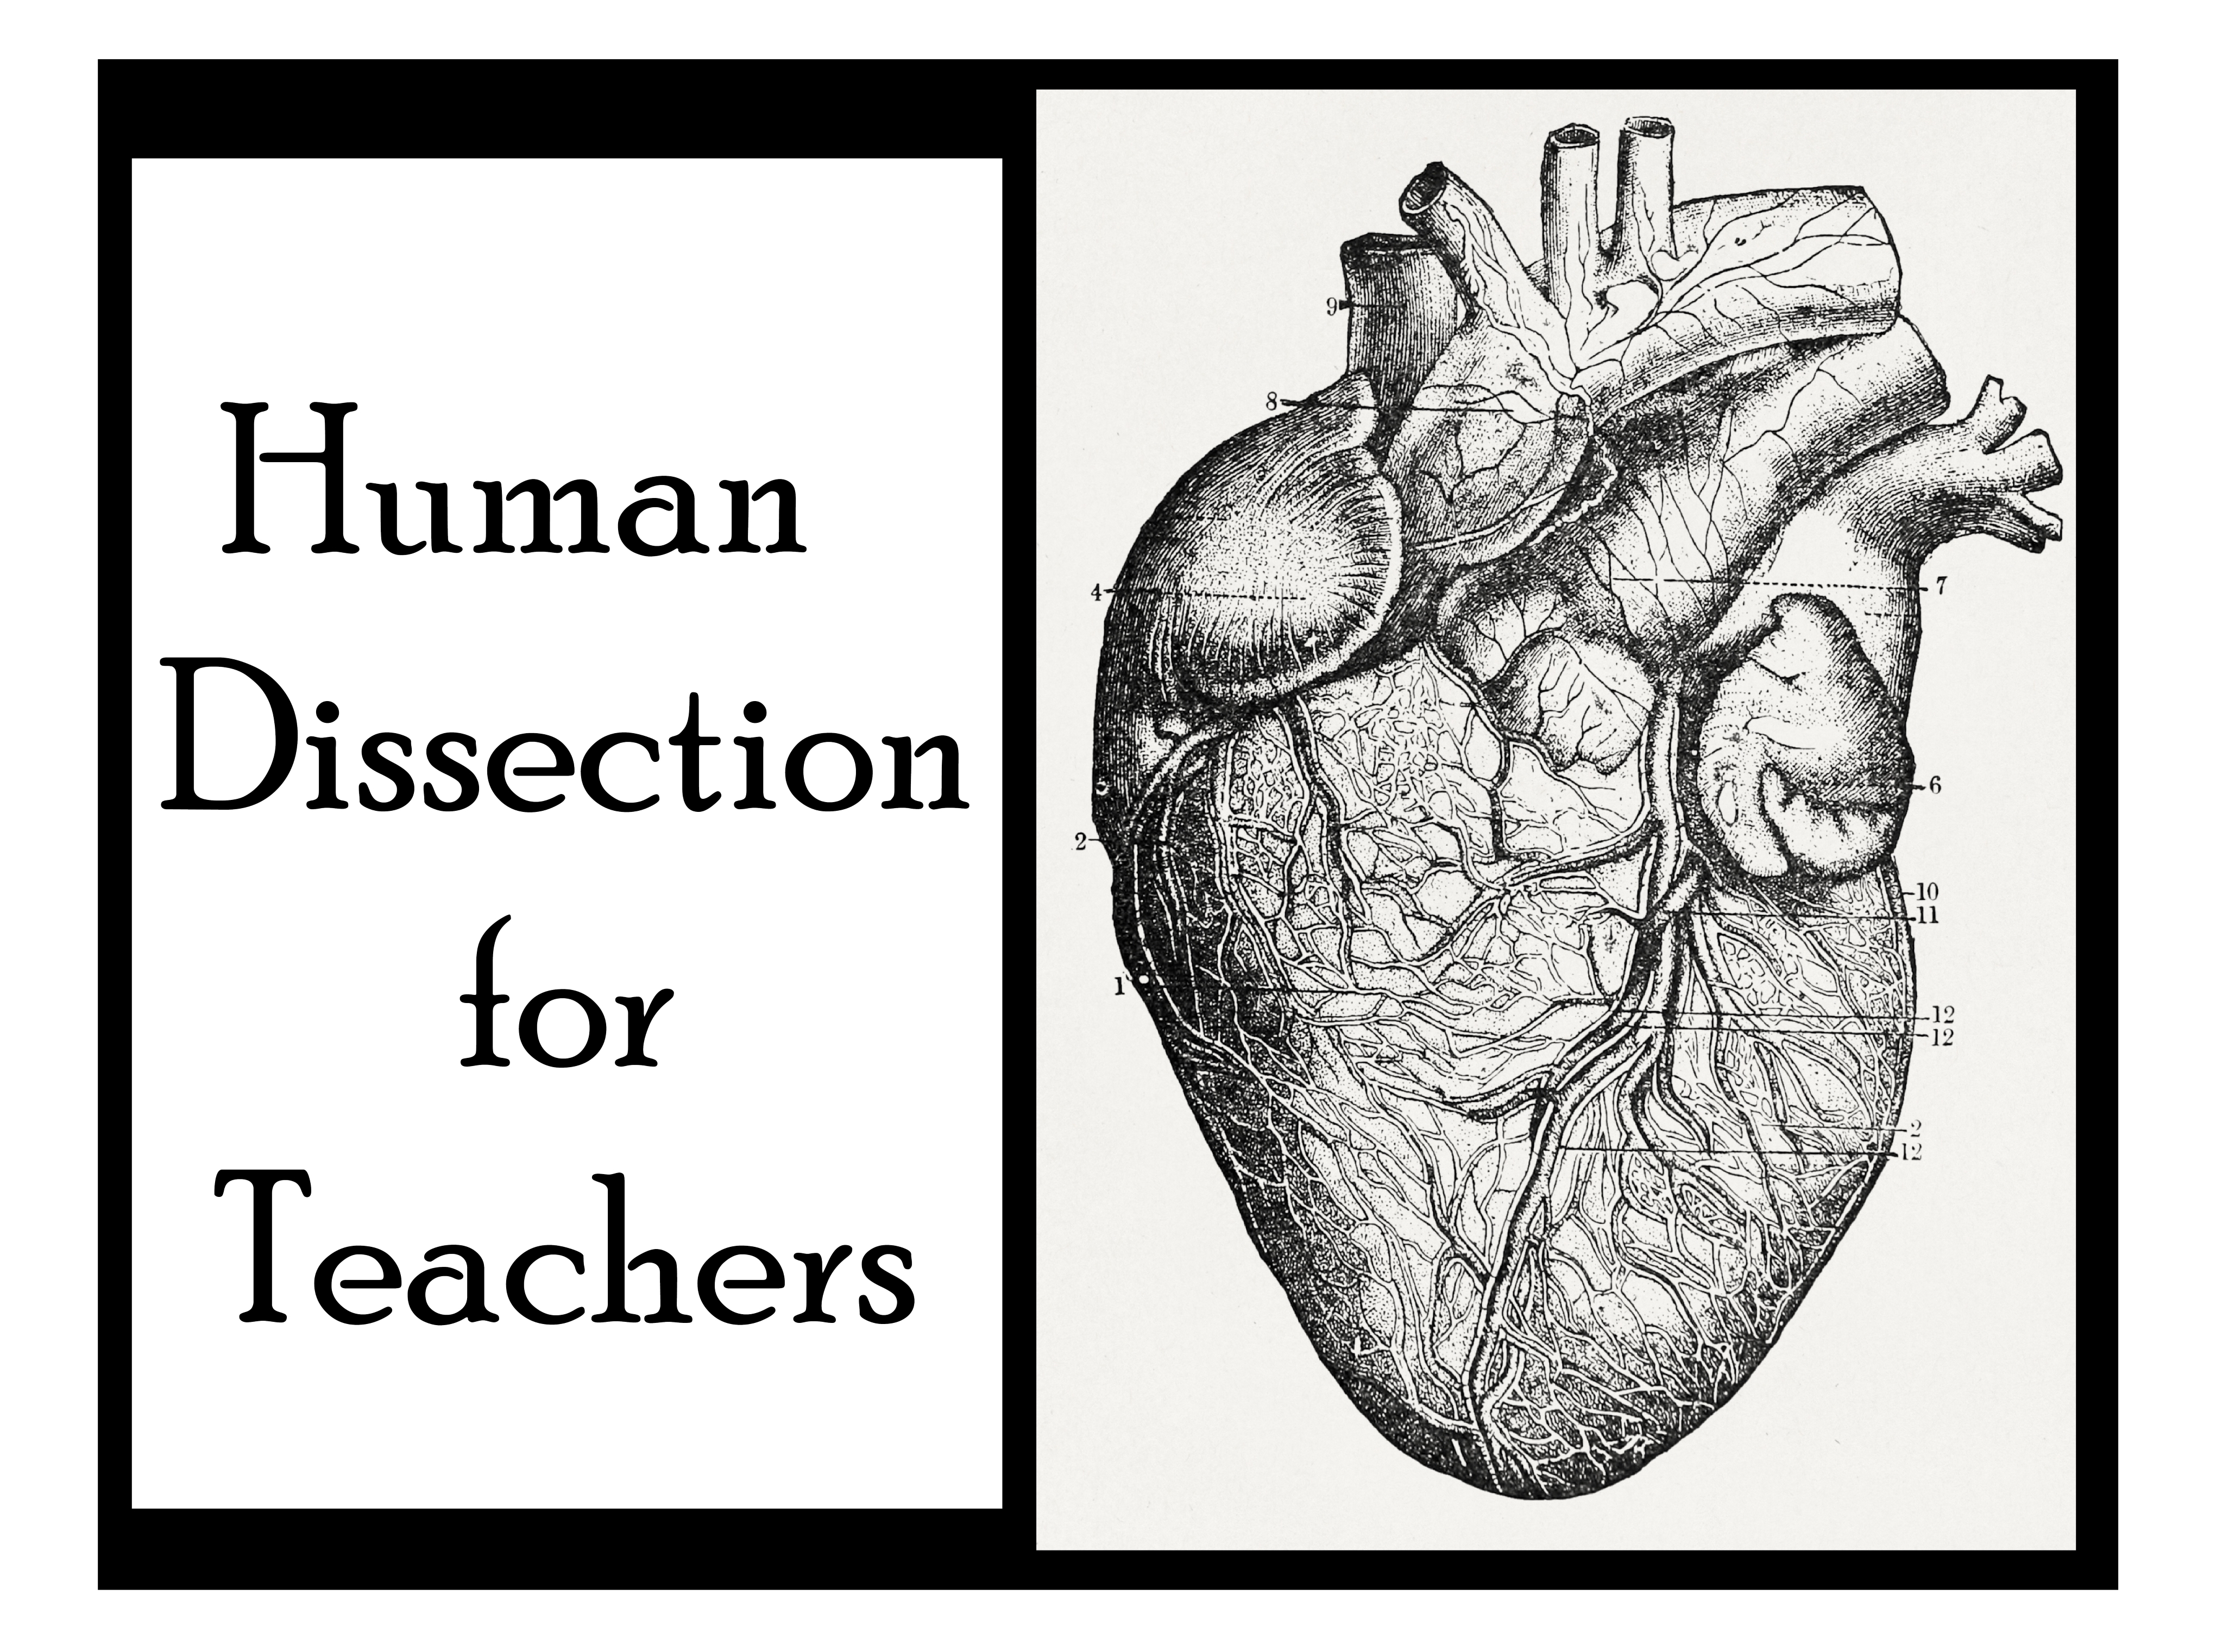 Human dissection for Teachers image